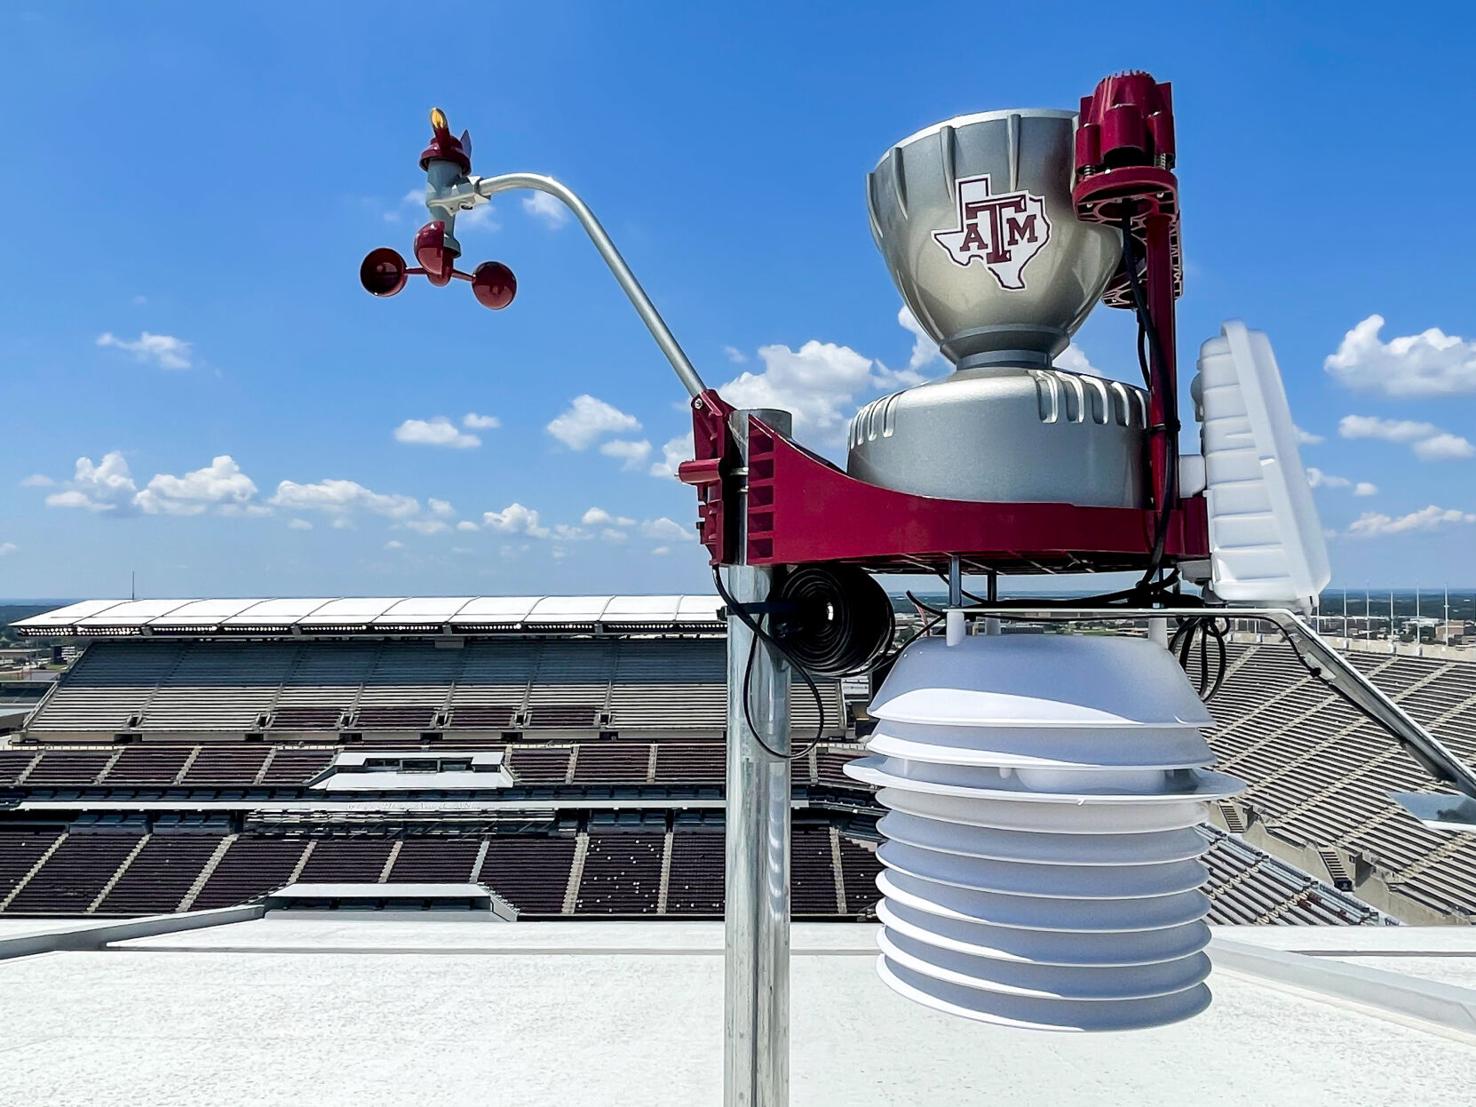 New on the radar: WeatherSTEM brings learning, safety